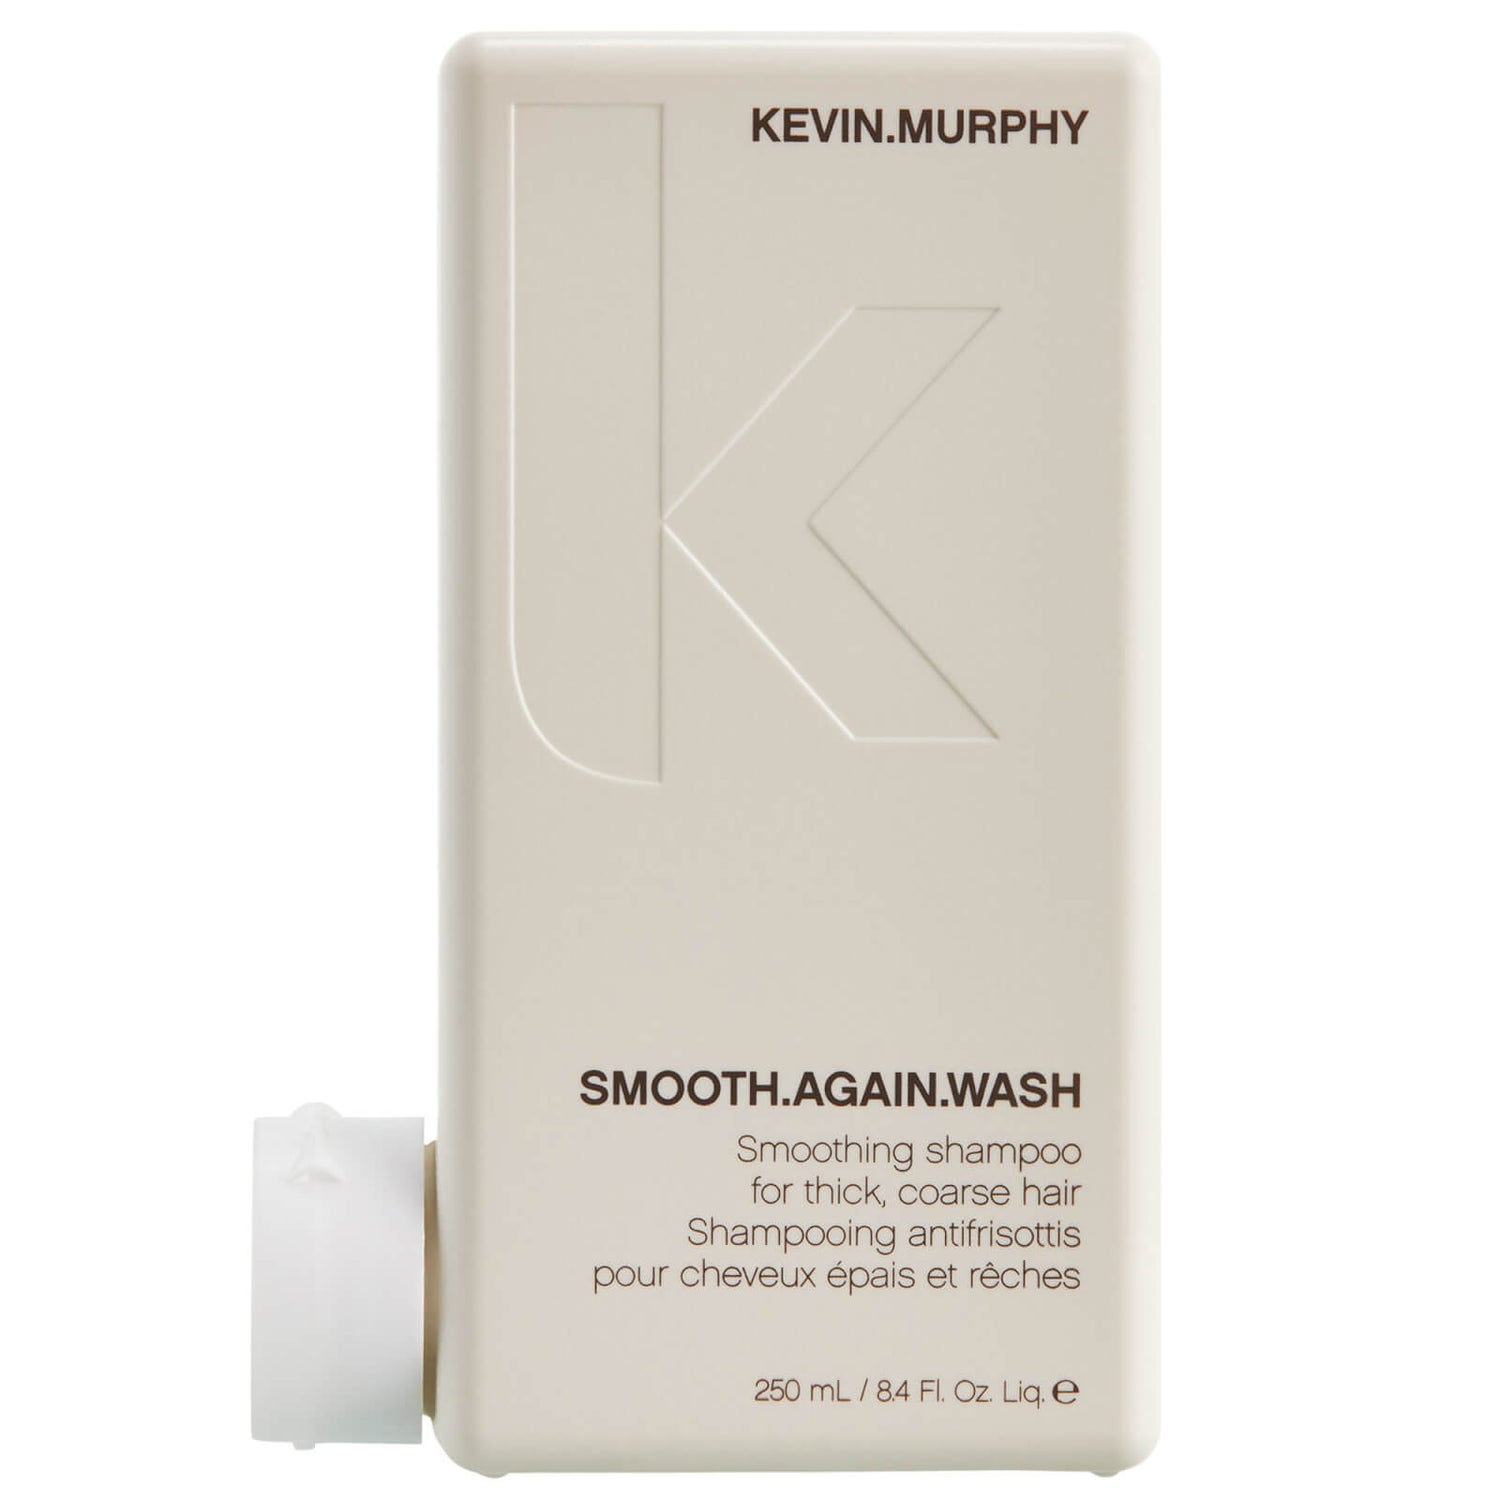 KEVIN MURPHY Smooth.Again.Wash 250ml